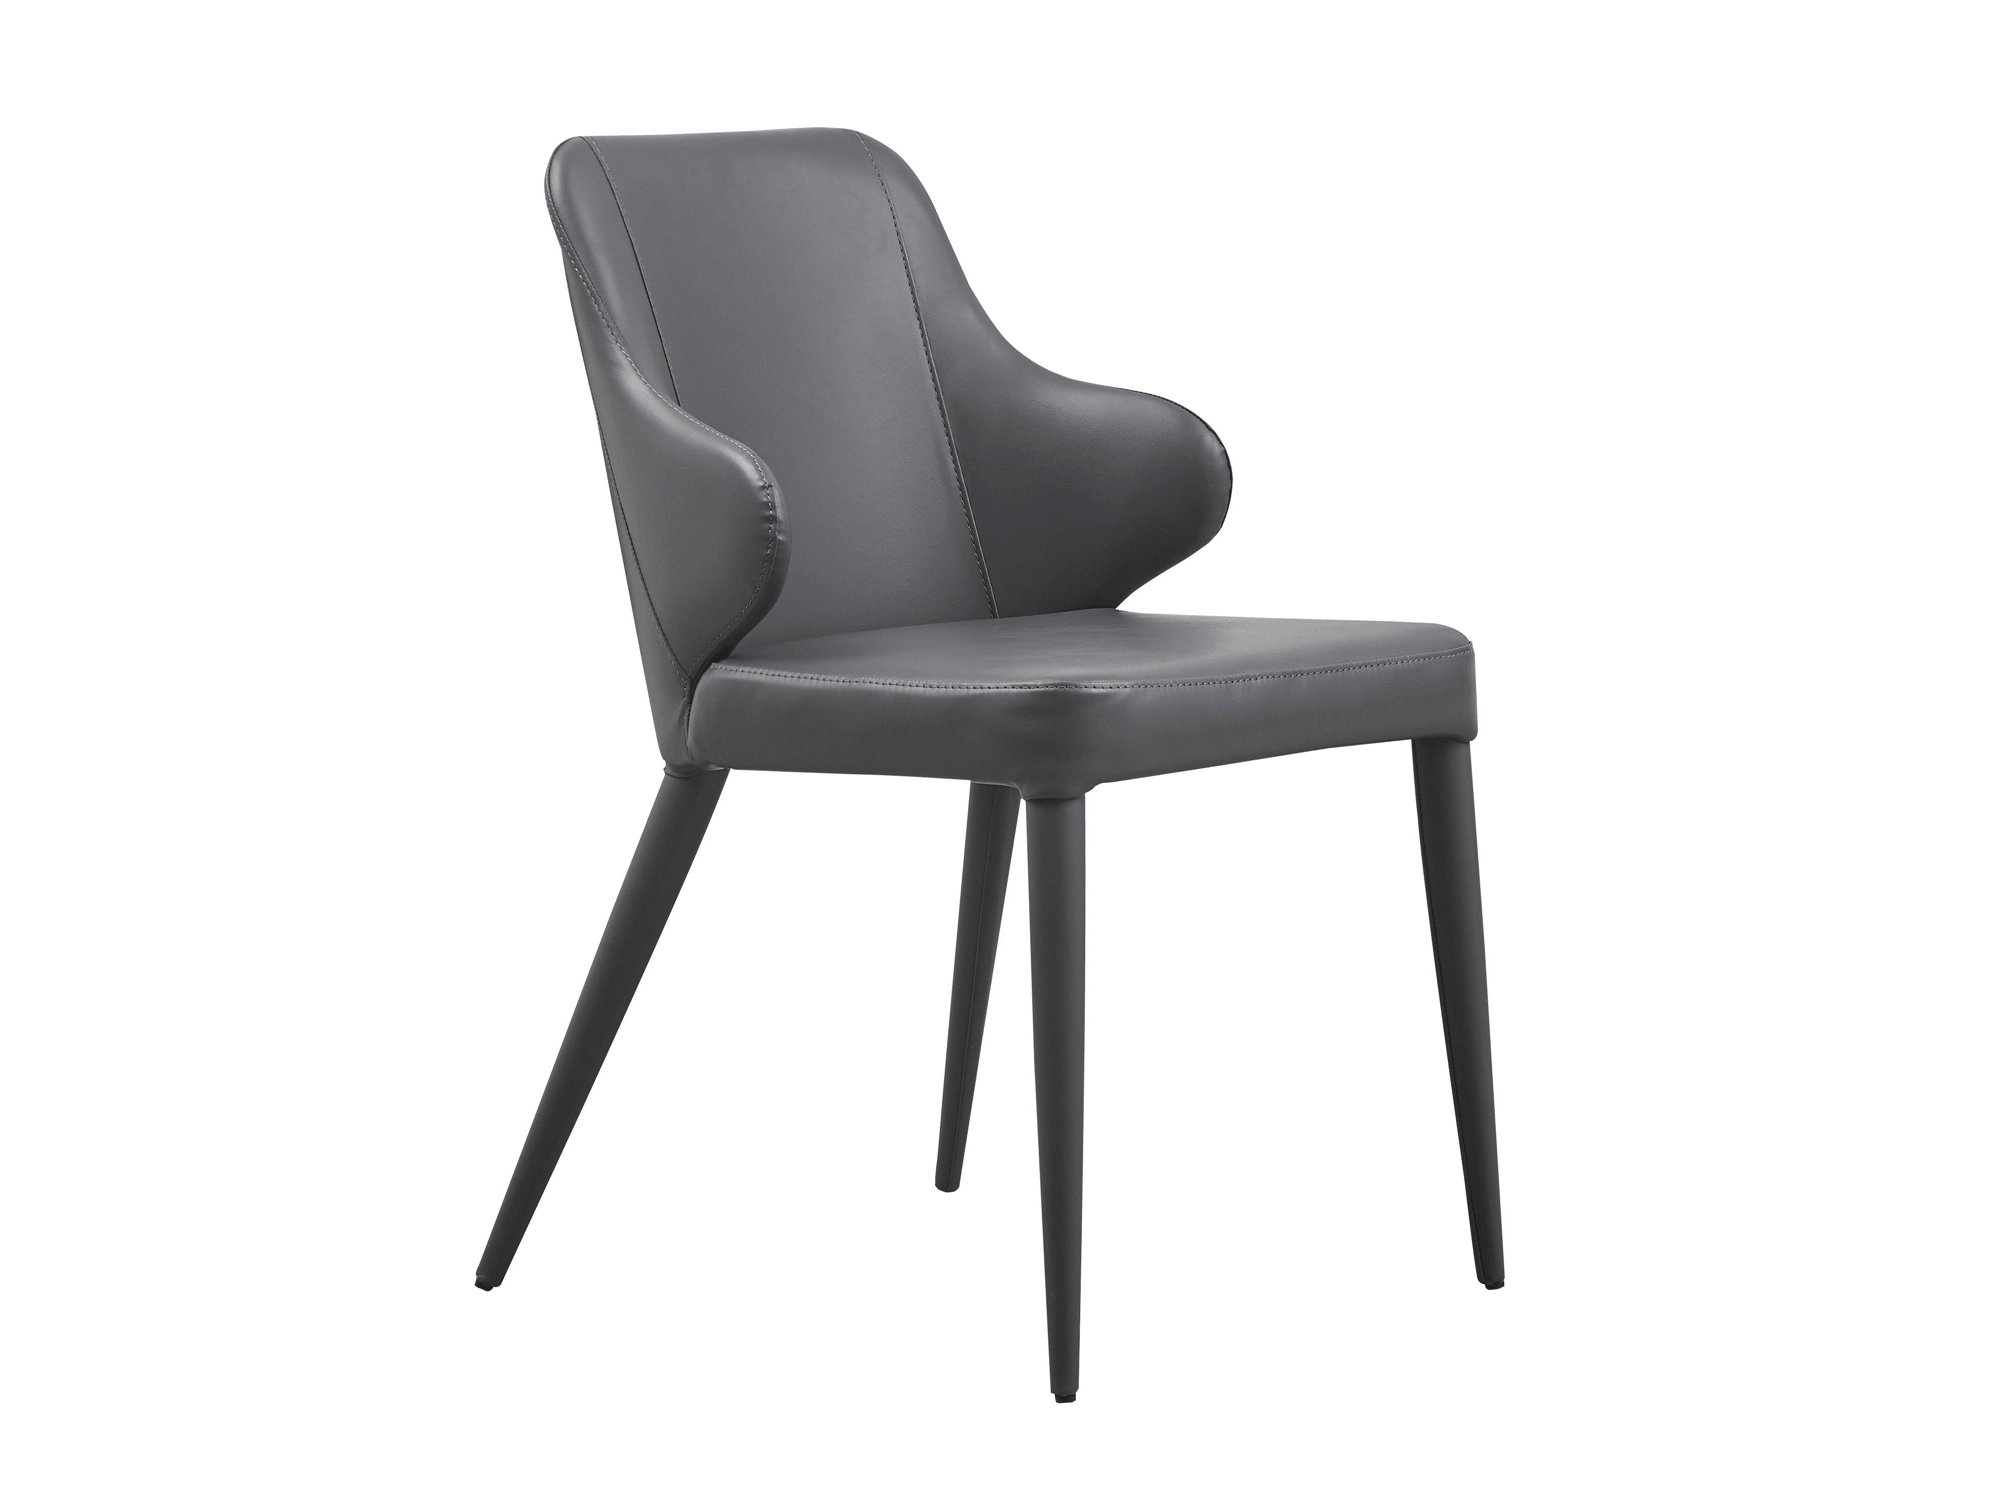 Kristina Dining Chair in Grey - Euro Living Furniture